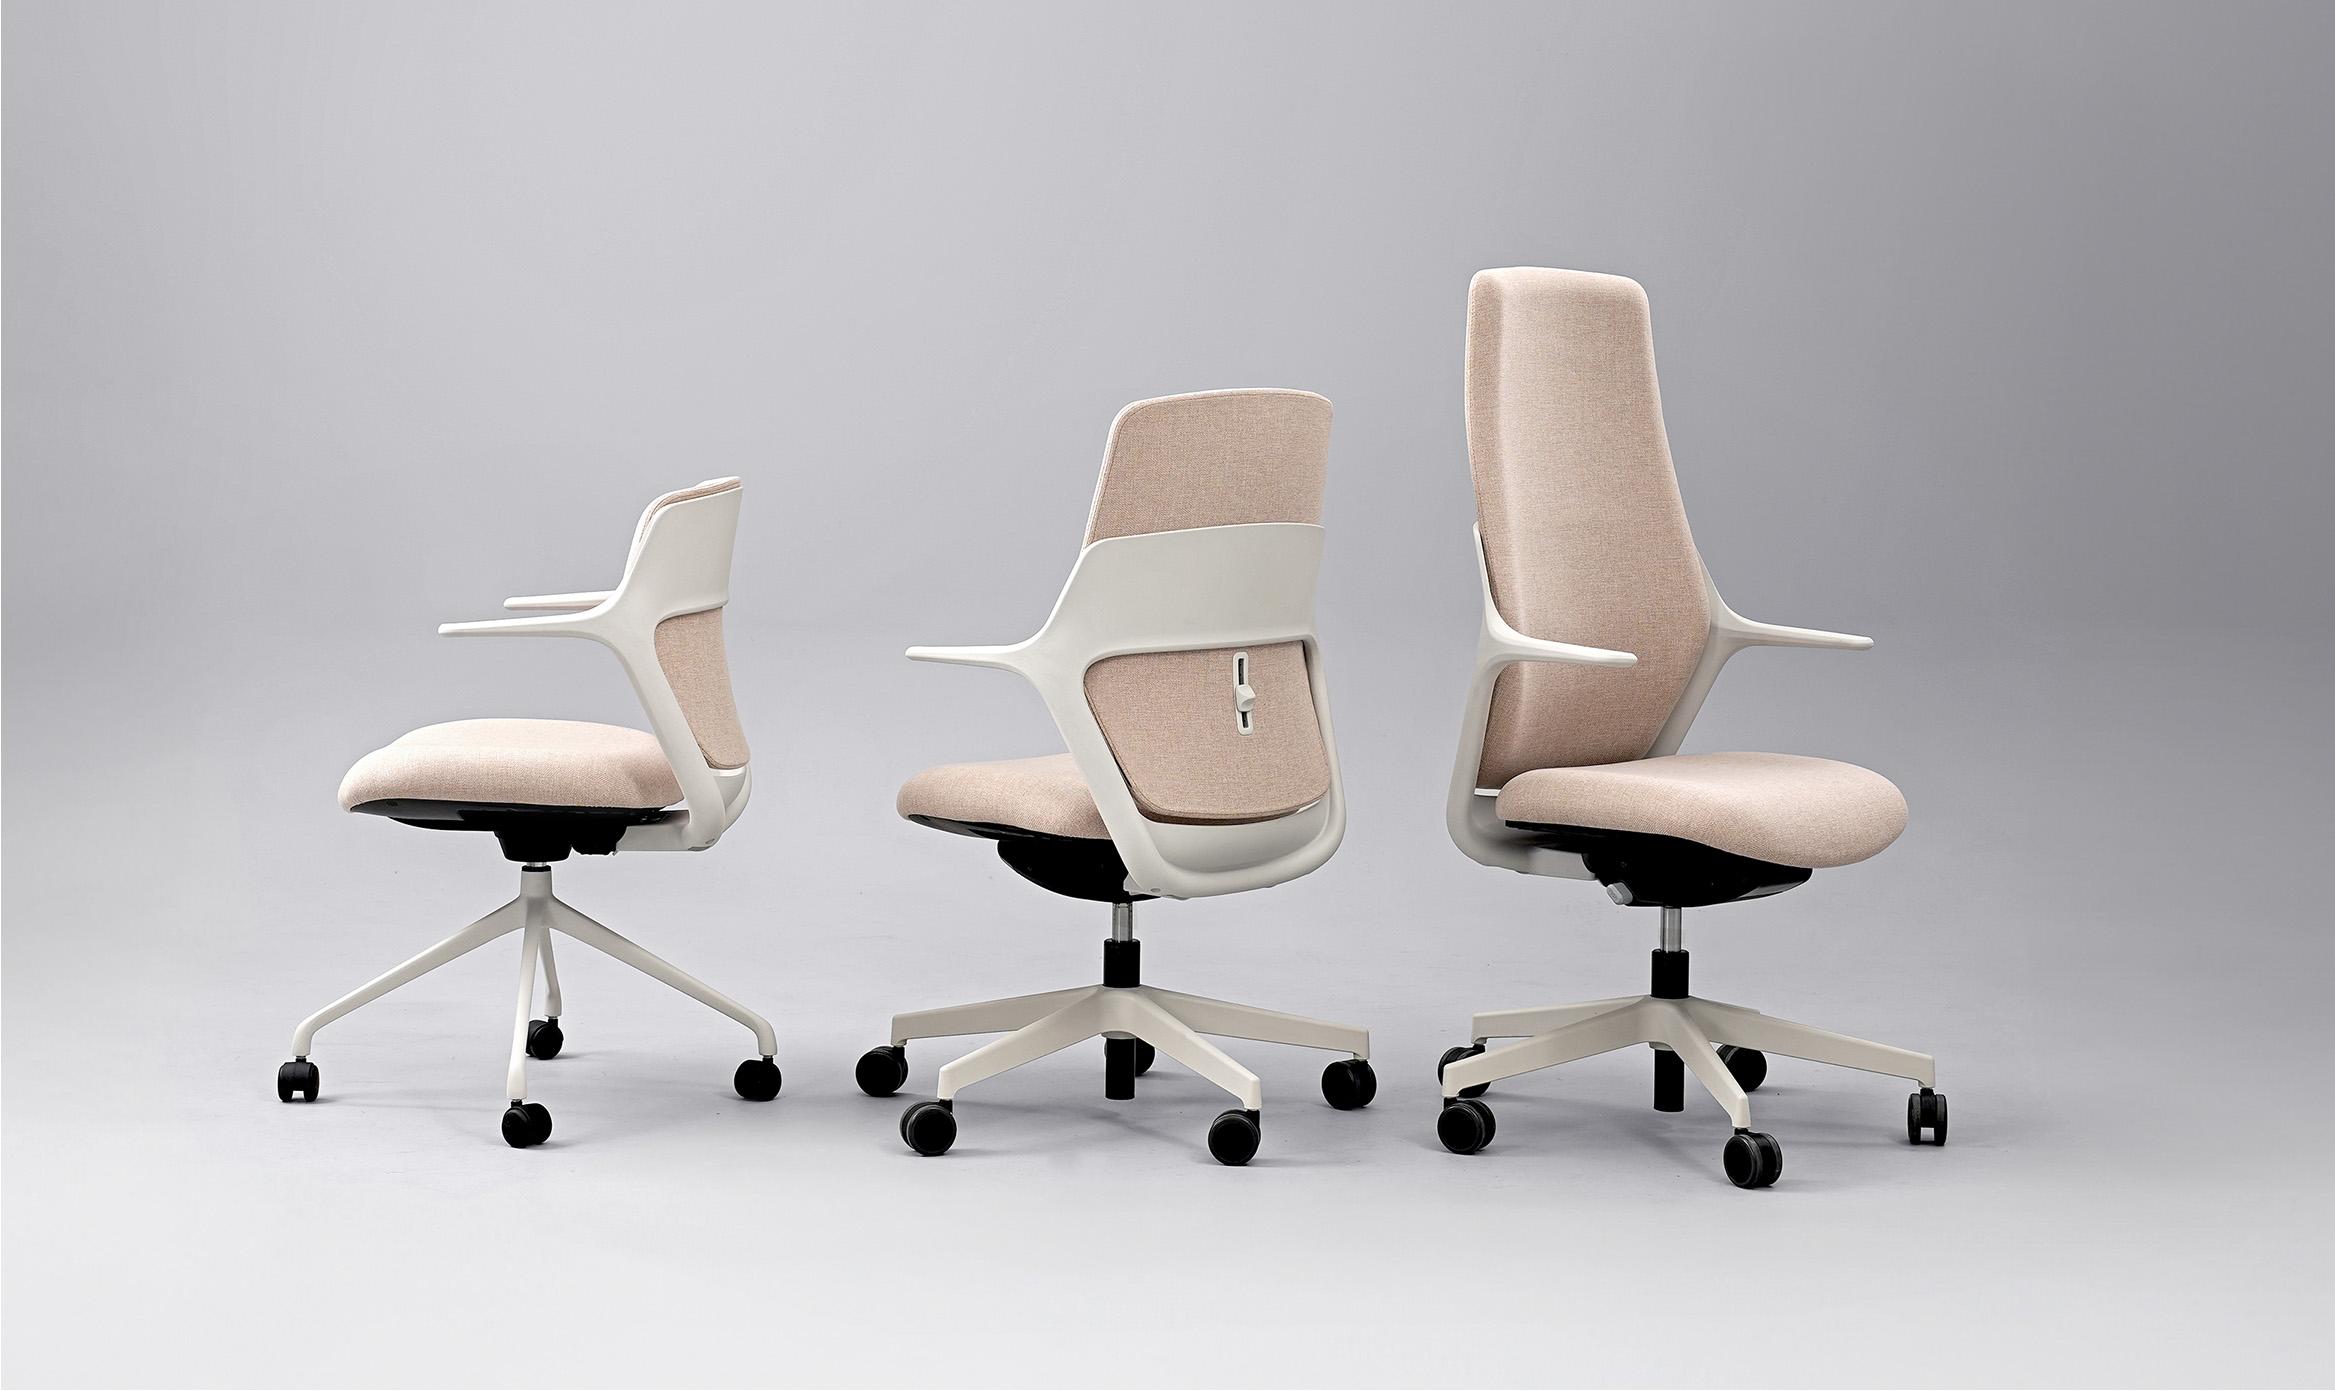 Three OFY chairs designed by Alegre Design for Narbutas, shown from different angles. The chairs feature ergonomic design, beige fabric finishes, and adjustable lumbar support, ideal for modern office settings.